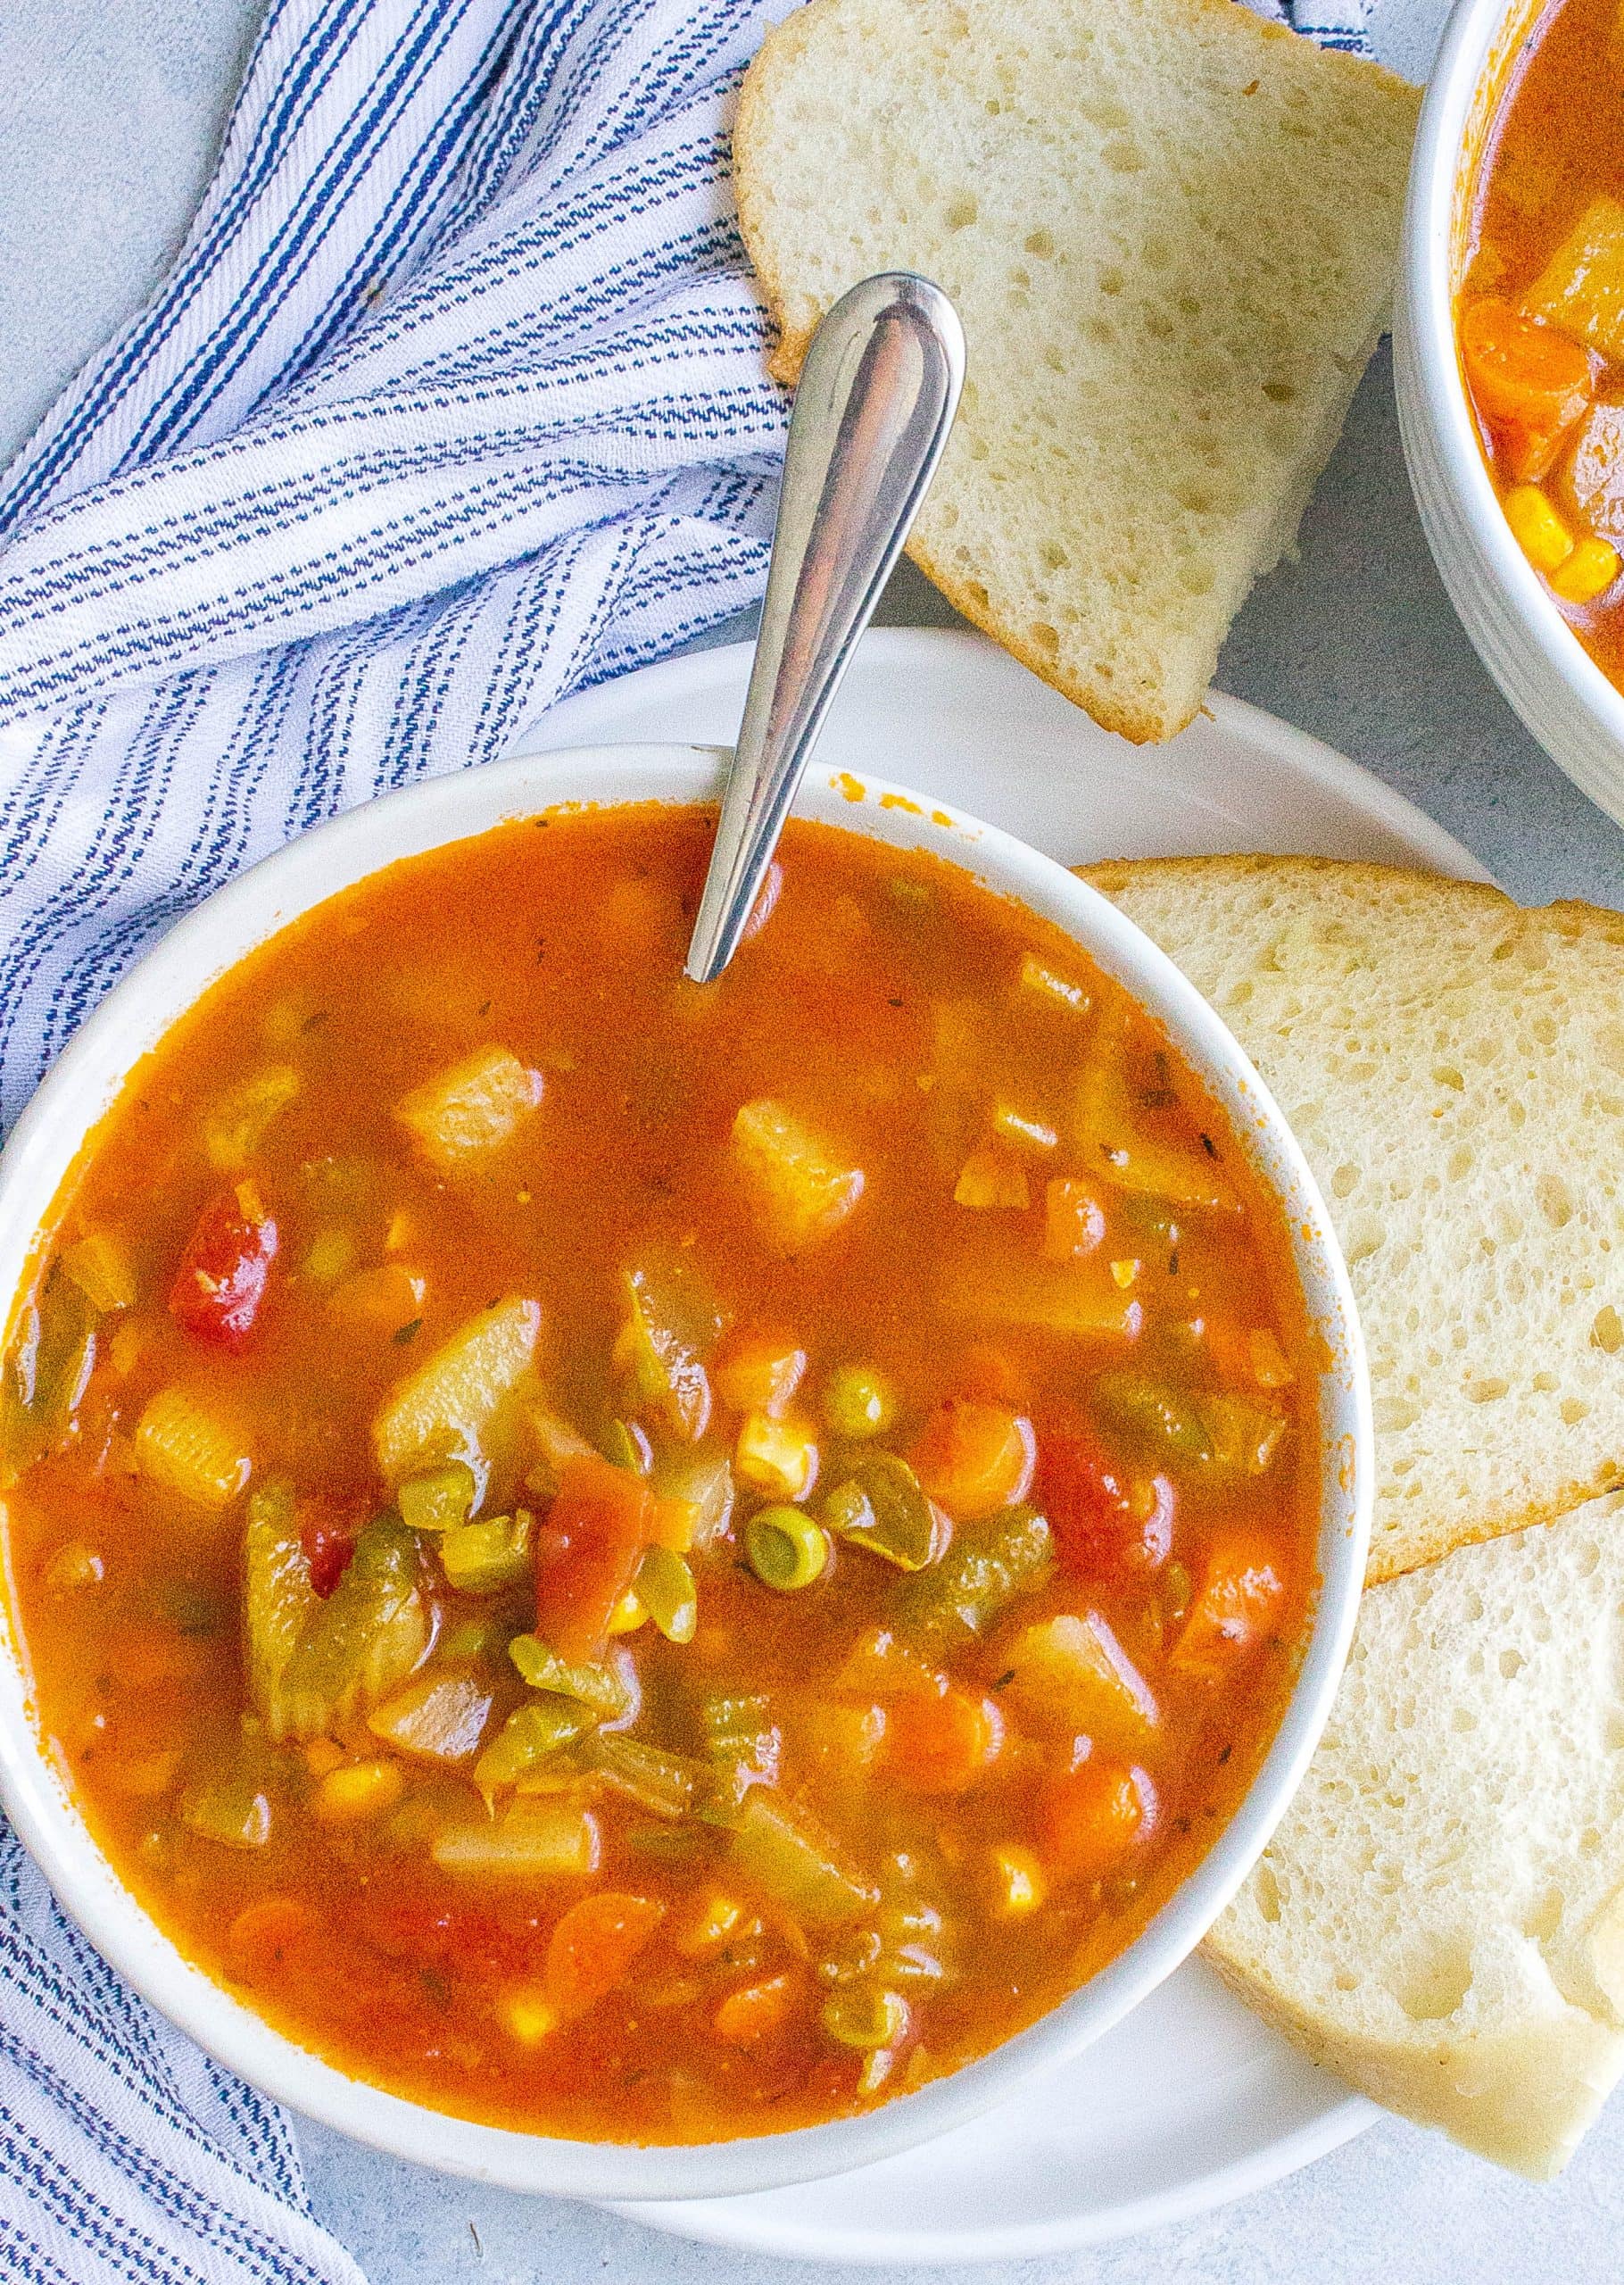 Homemade Vegetable Soup with bread